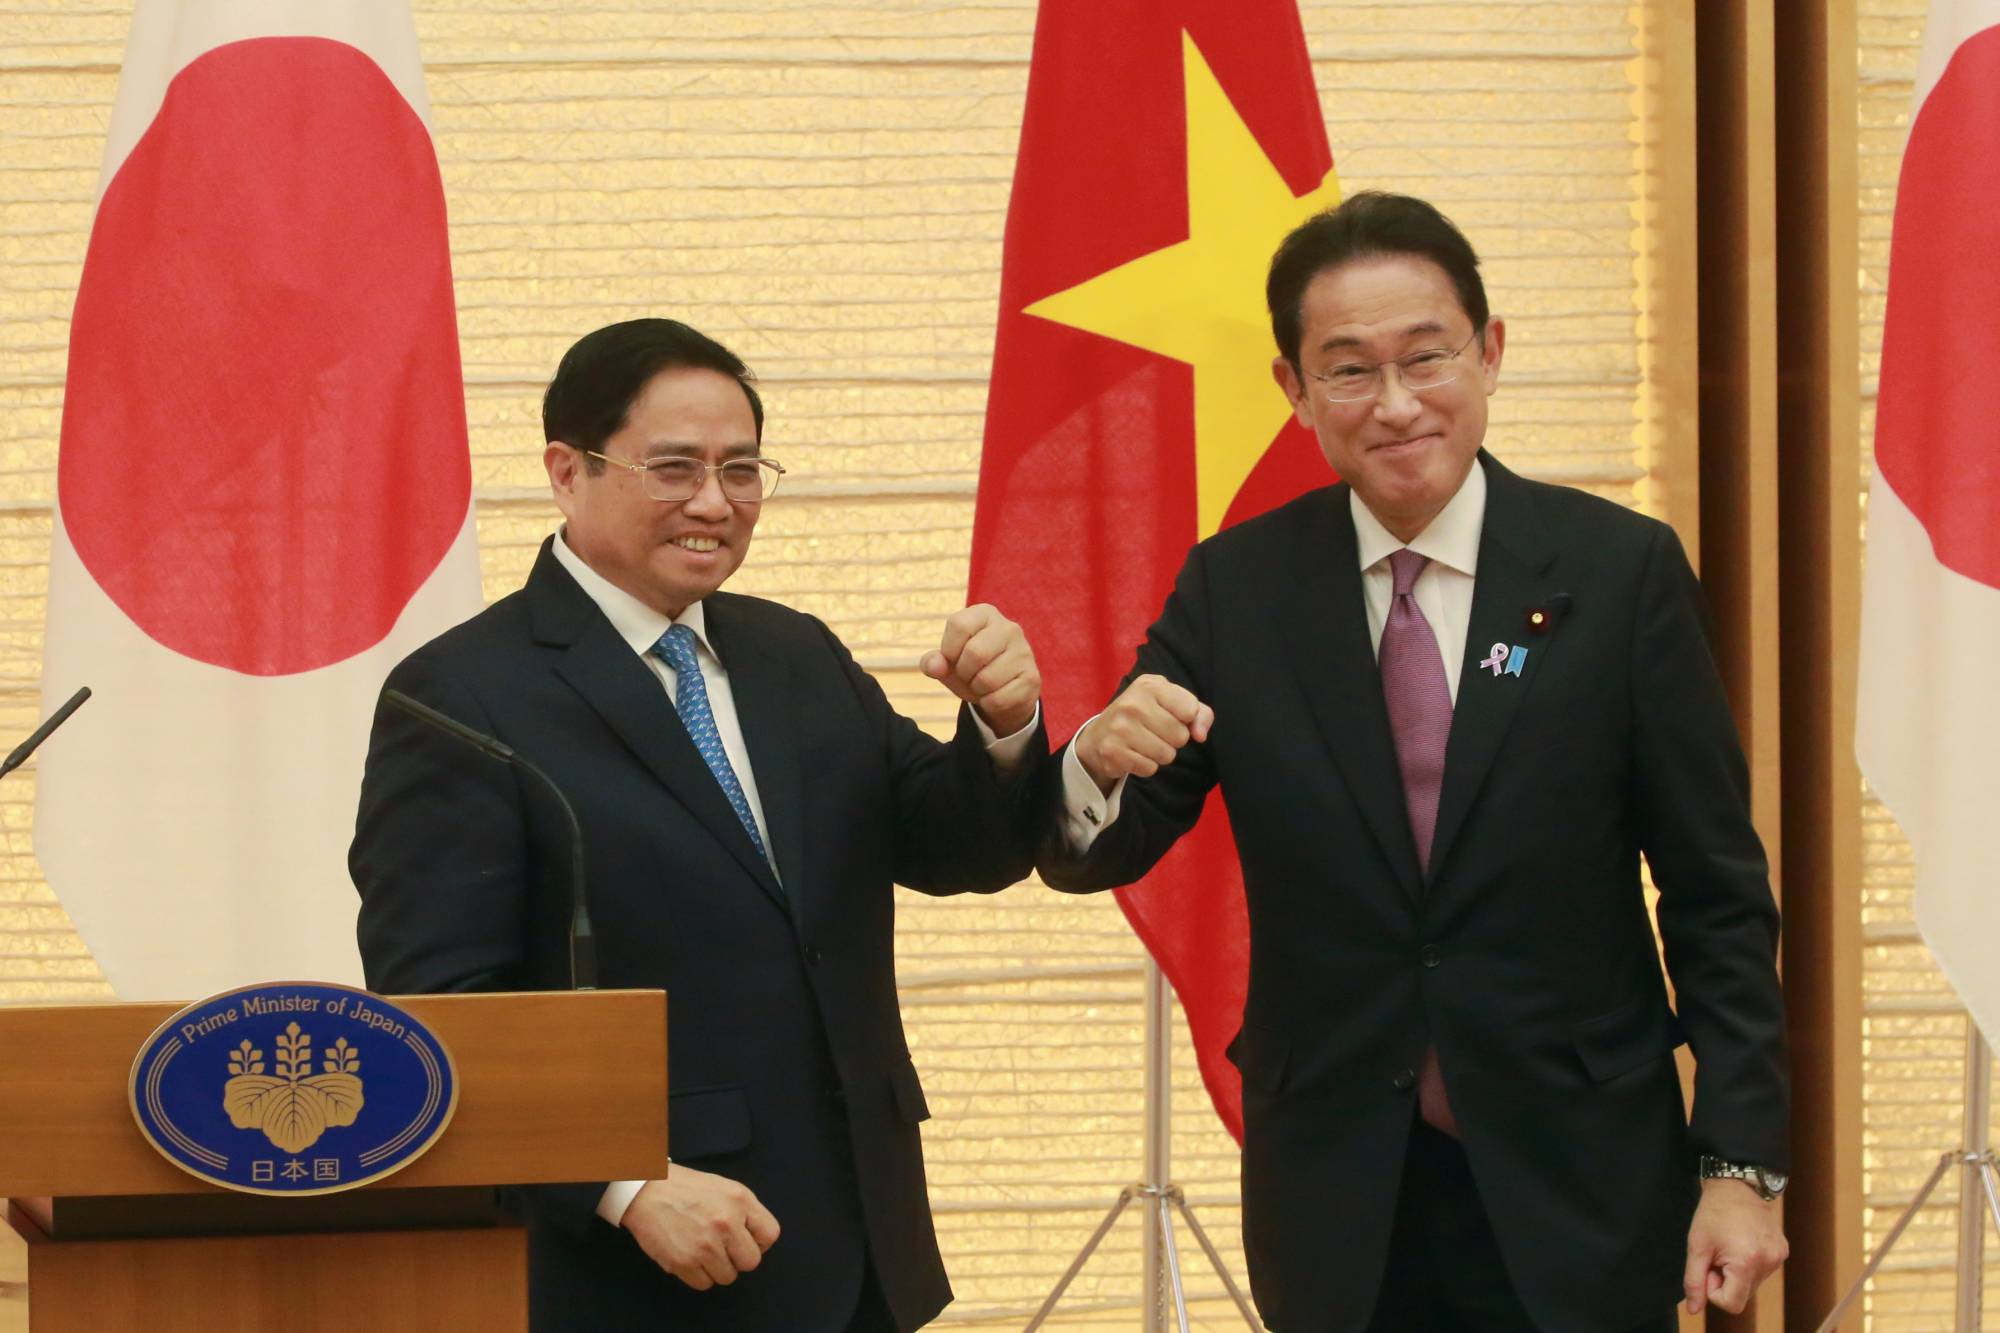 Prime Minister Fumio Kishida and his visiting Vietnamese counterpart, Pham Minh Chinh, pose for a photo following a news conference in Tokyo on Wednesday. | POOL / VIA BLOOMBERG